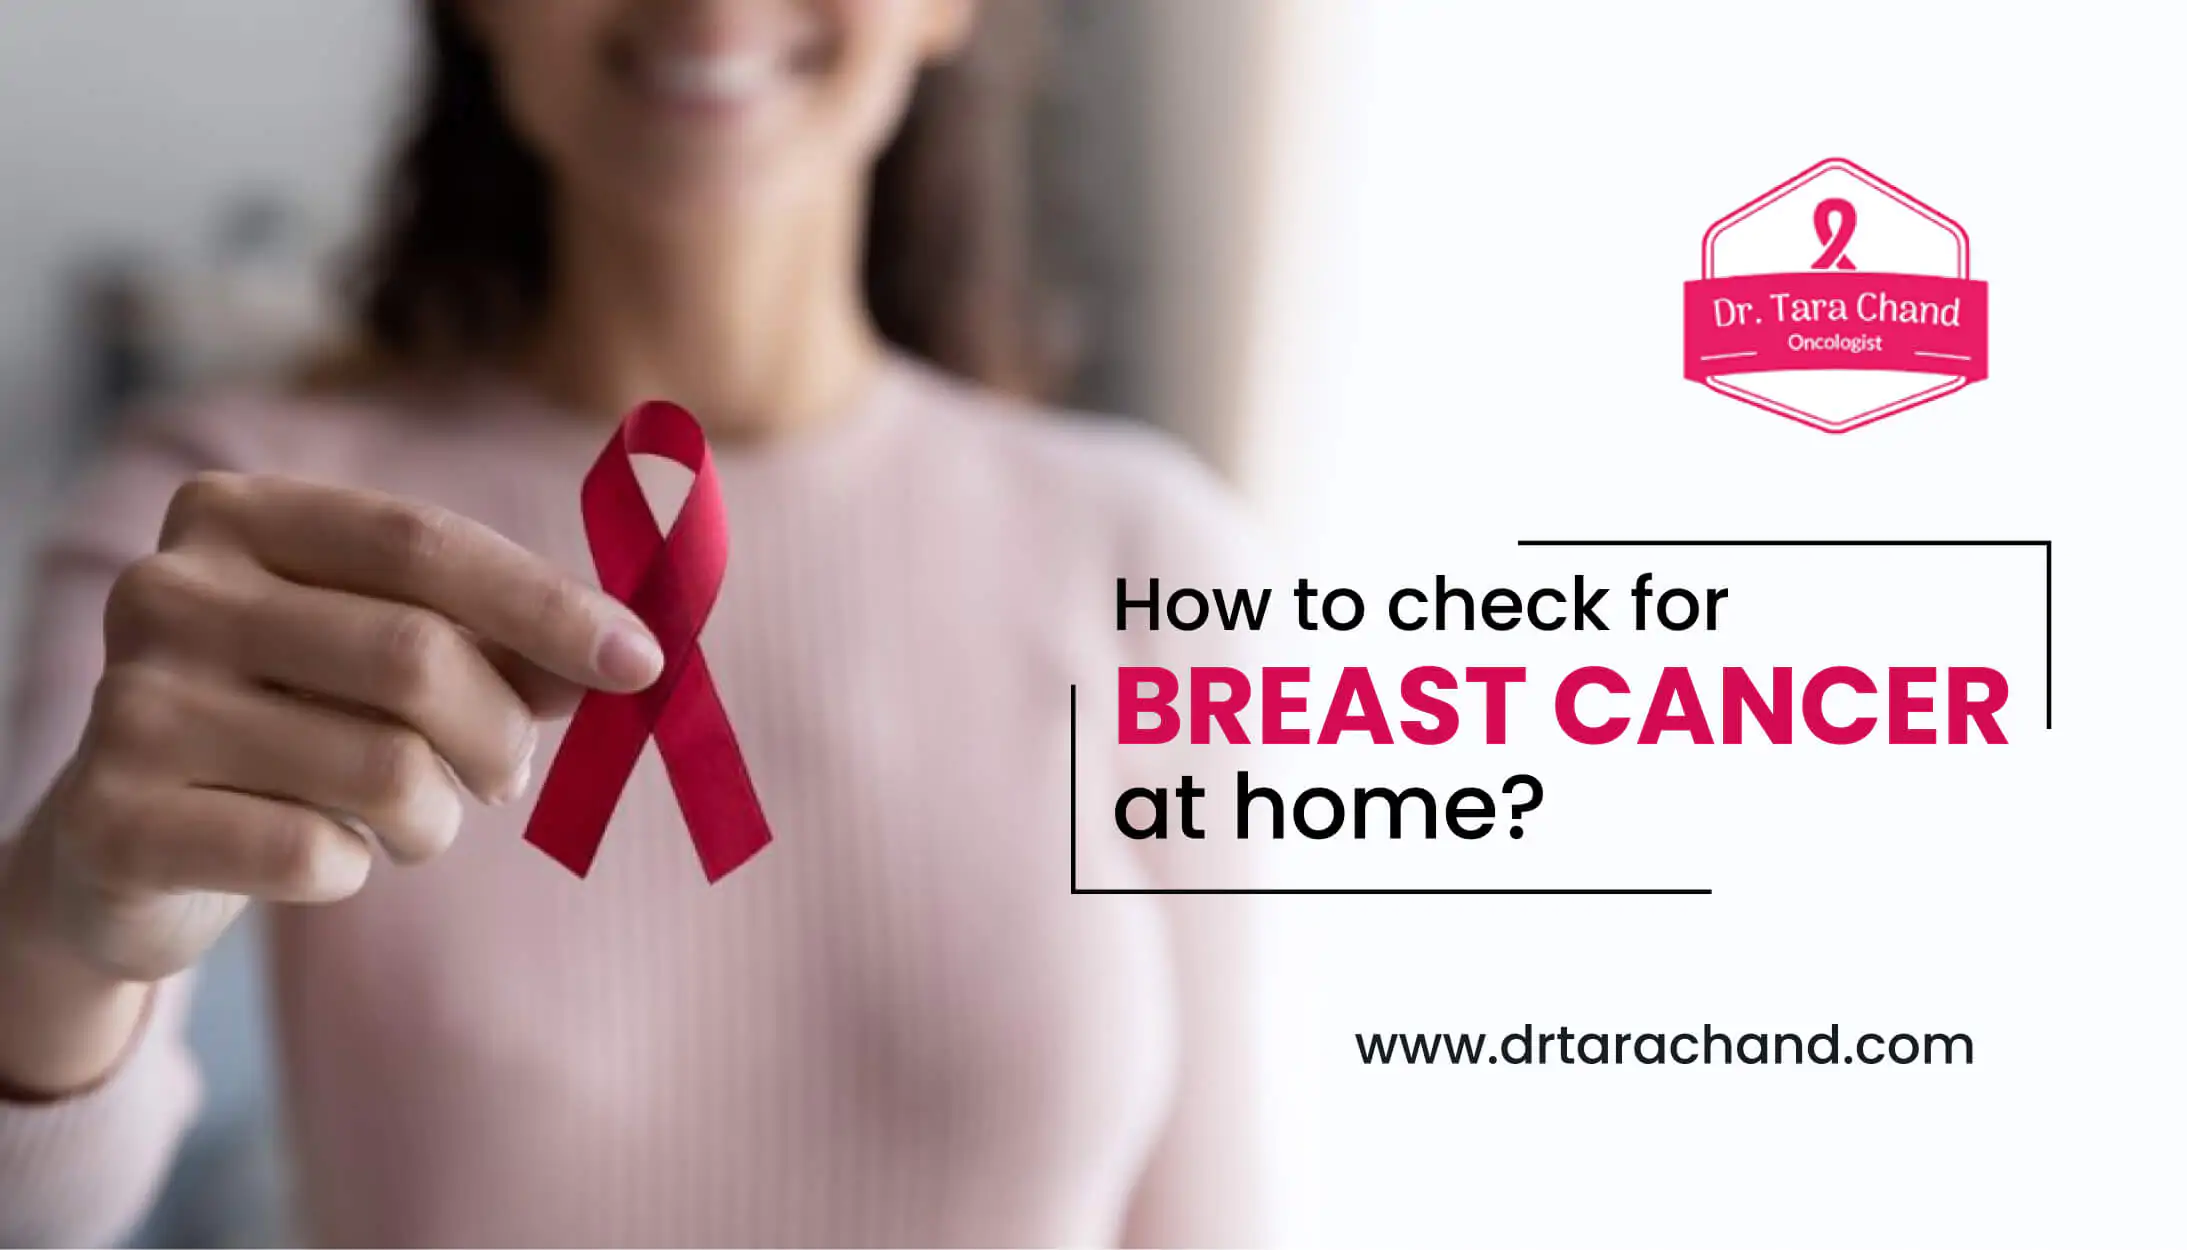 How to check for breast cancer at home?